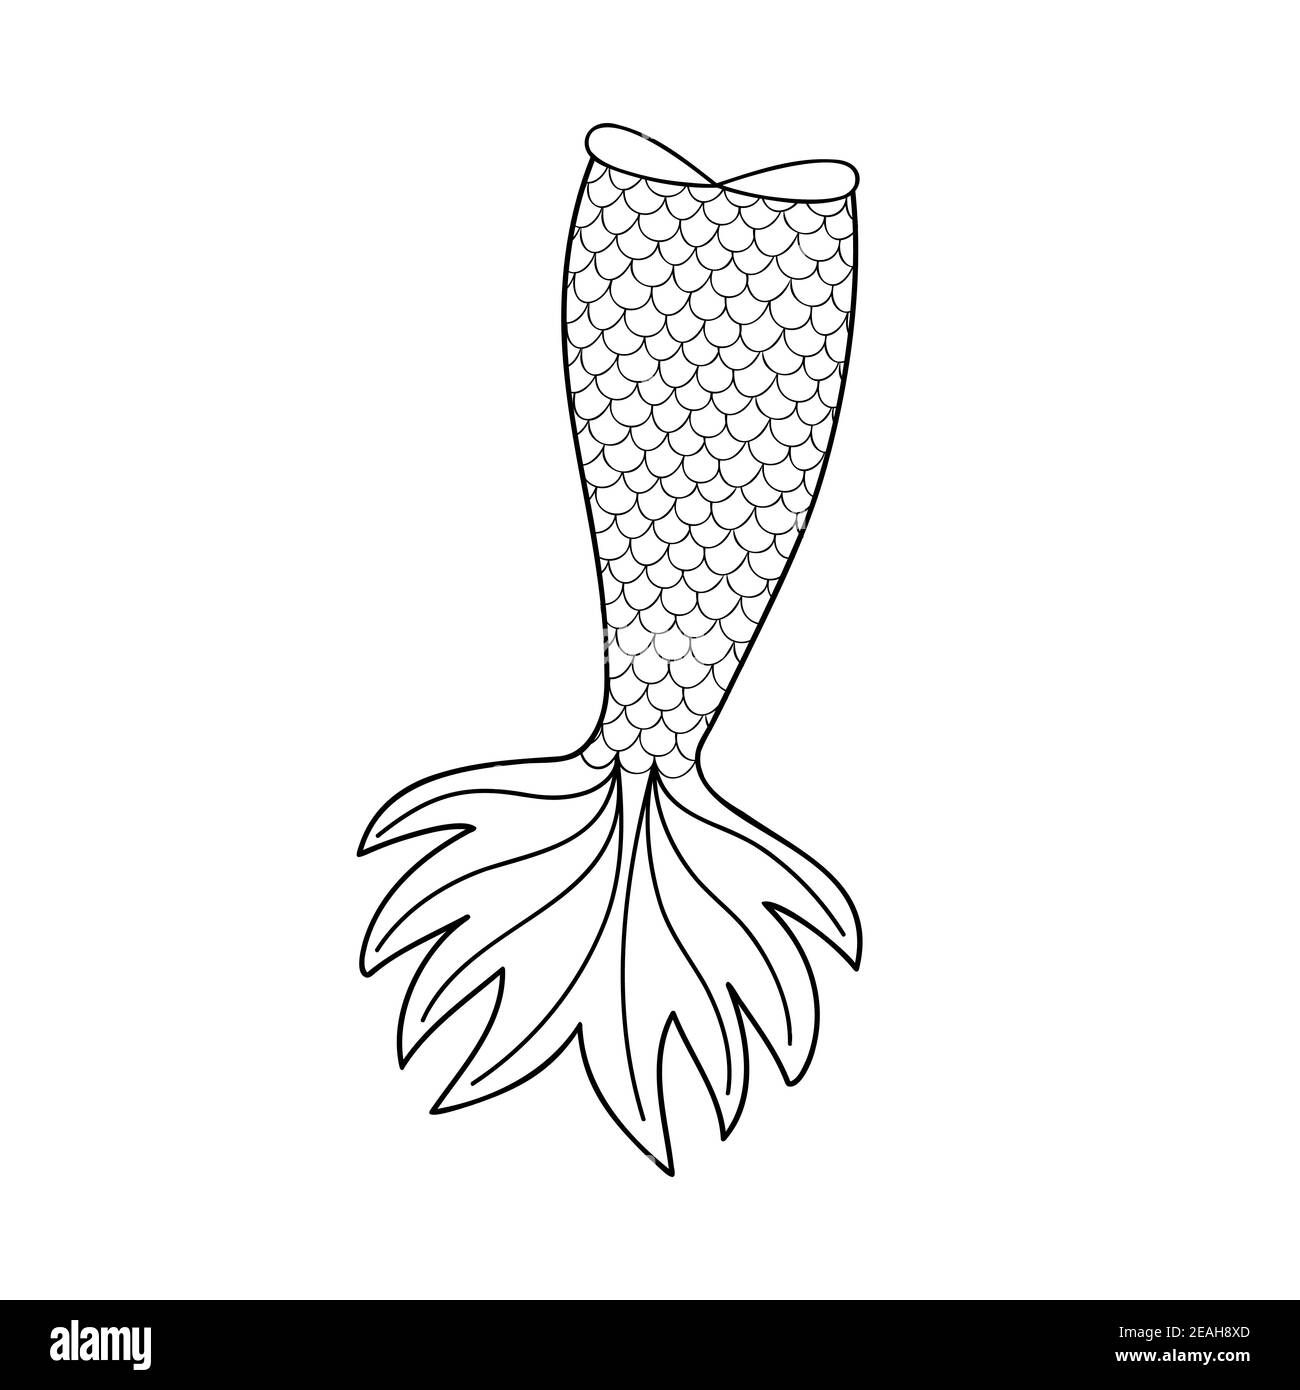 Mermaid tail in doodle outline style. Element of mermaid costume isolated on white background. Decoration for greeting card or tshirt design Stock Vector